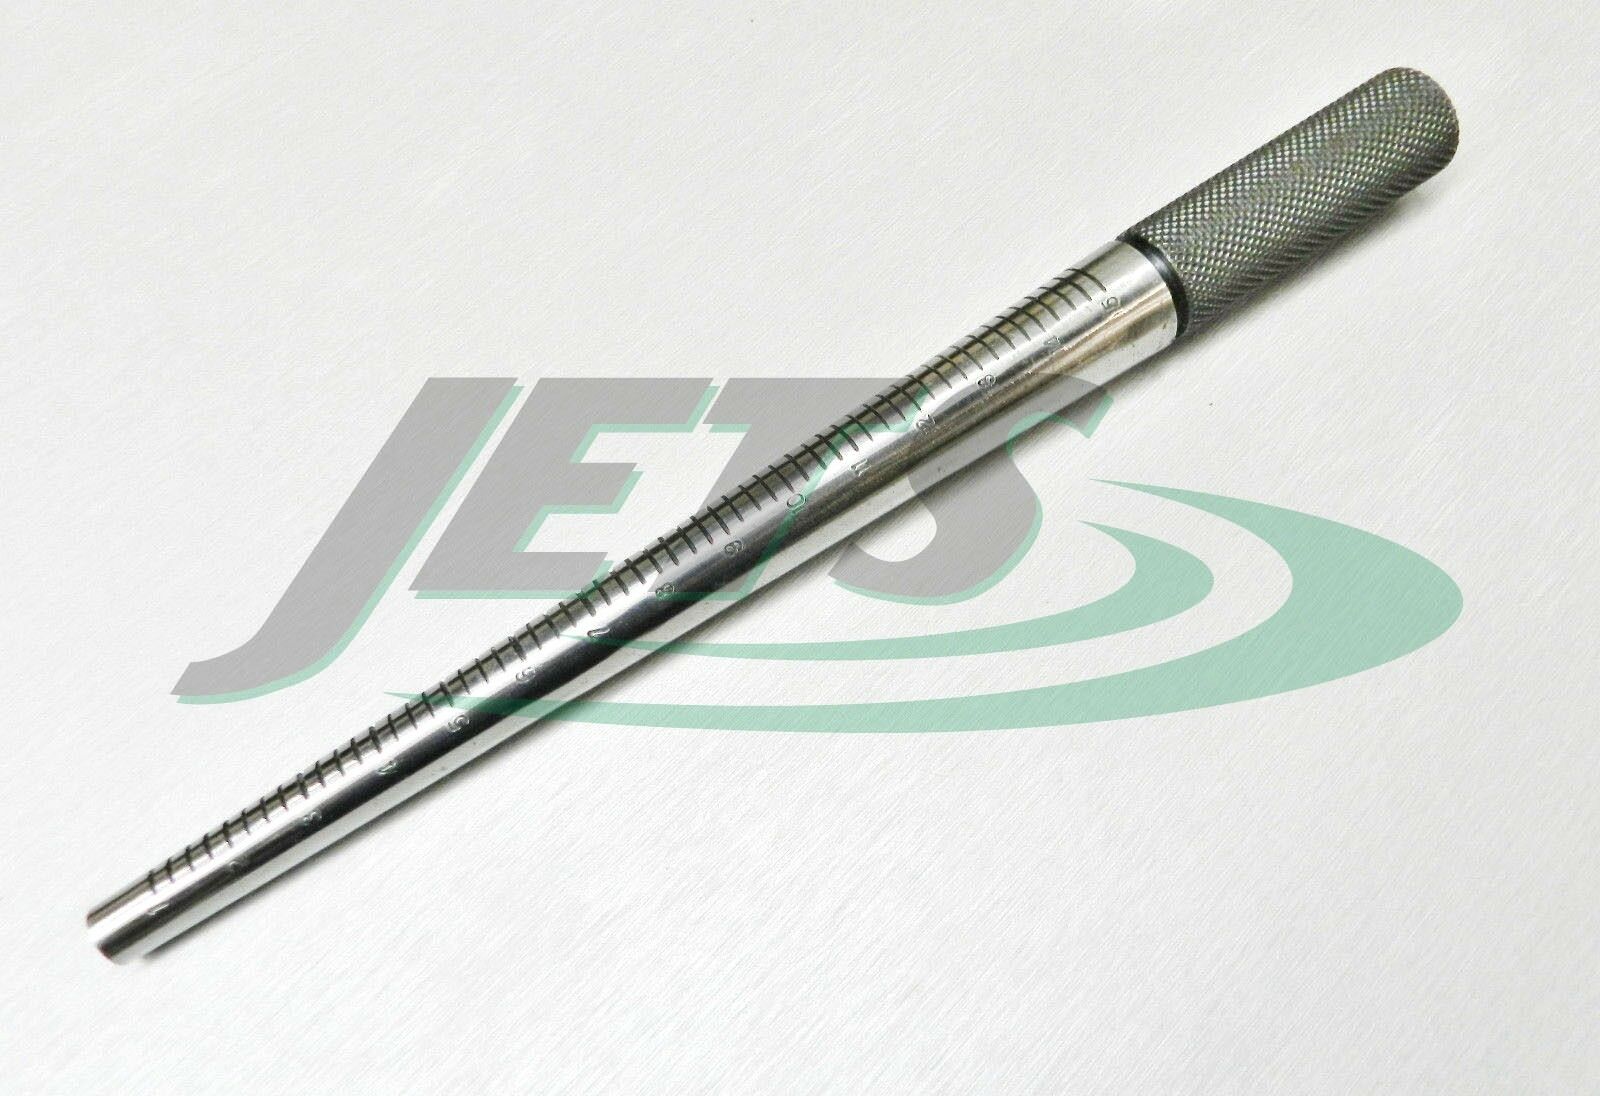 Steel Ring Mandrel Hardened Steel Marked 1-16 Un-grooved Jewelry Making Tool